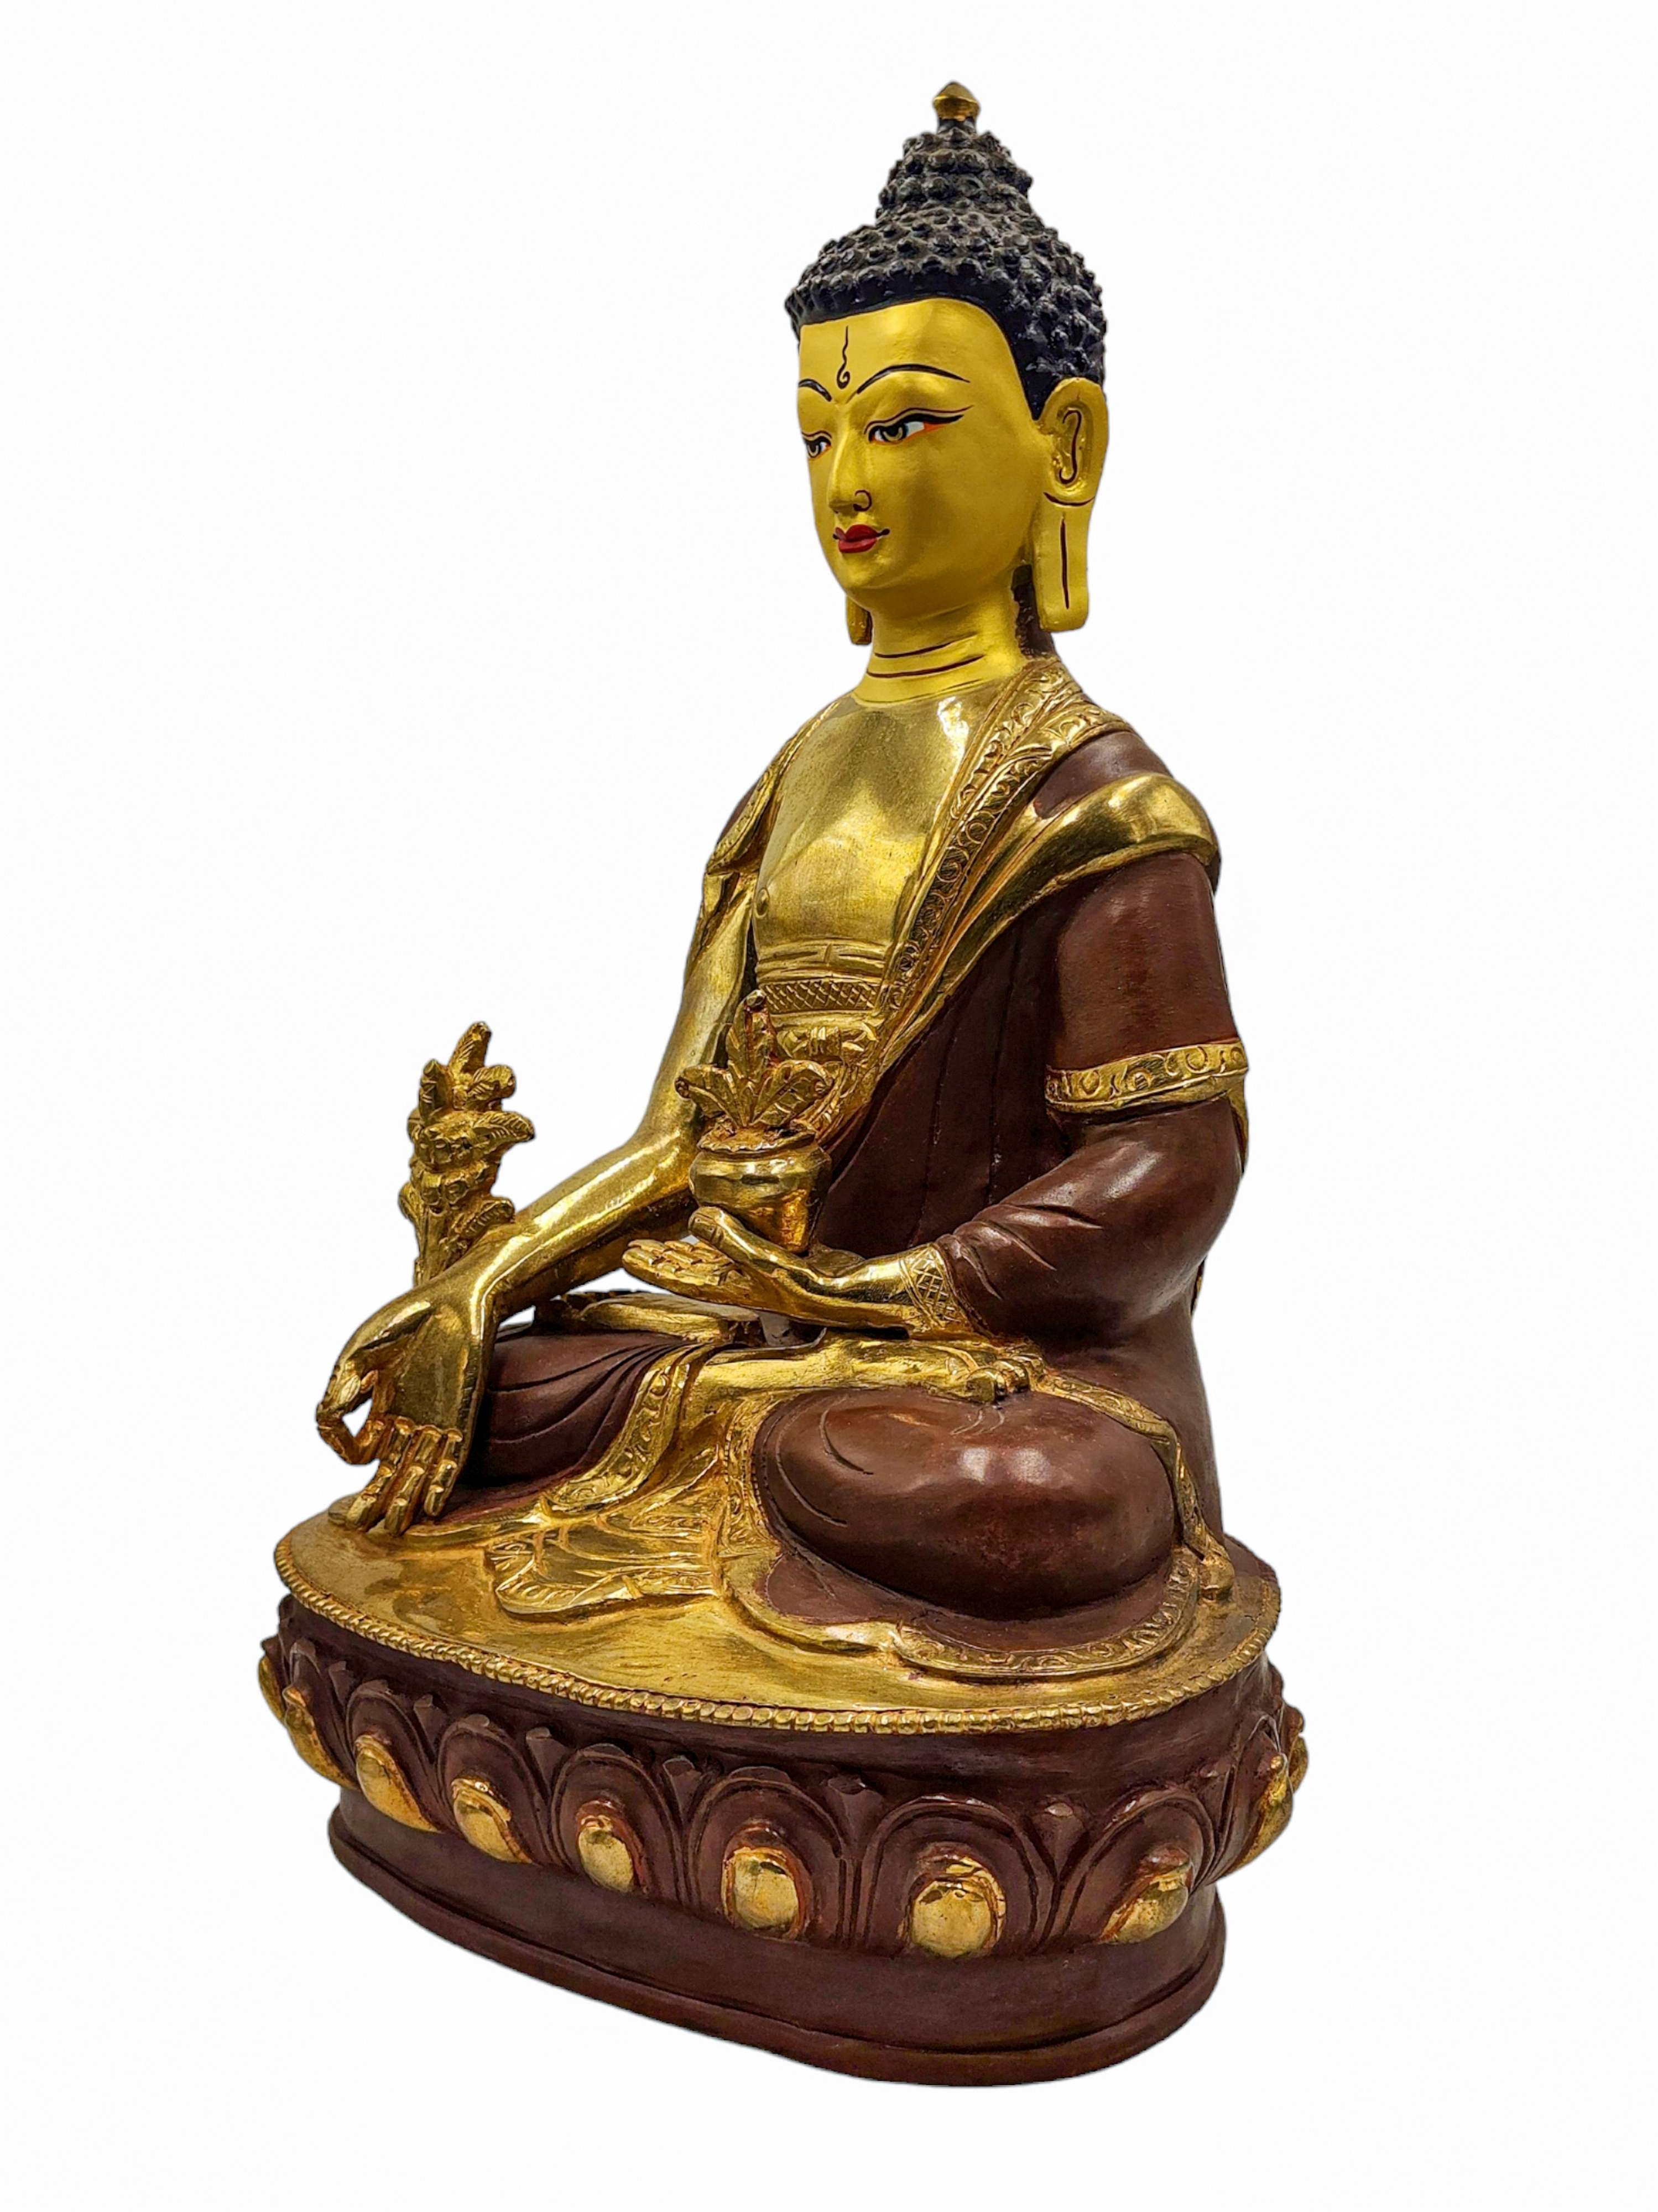 best Price, medicine Buddha, Buddhist Handmade Statue, partly Gold Plated, Wtih face Painted, For A Gift, Altars And Buddhist Ritual